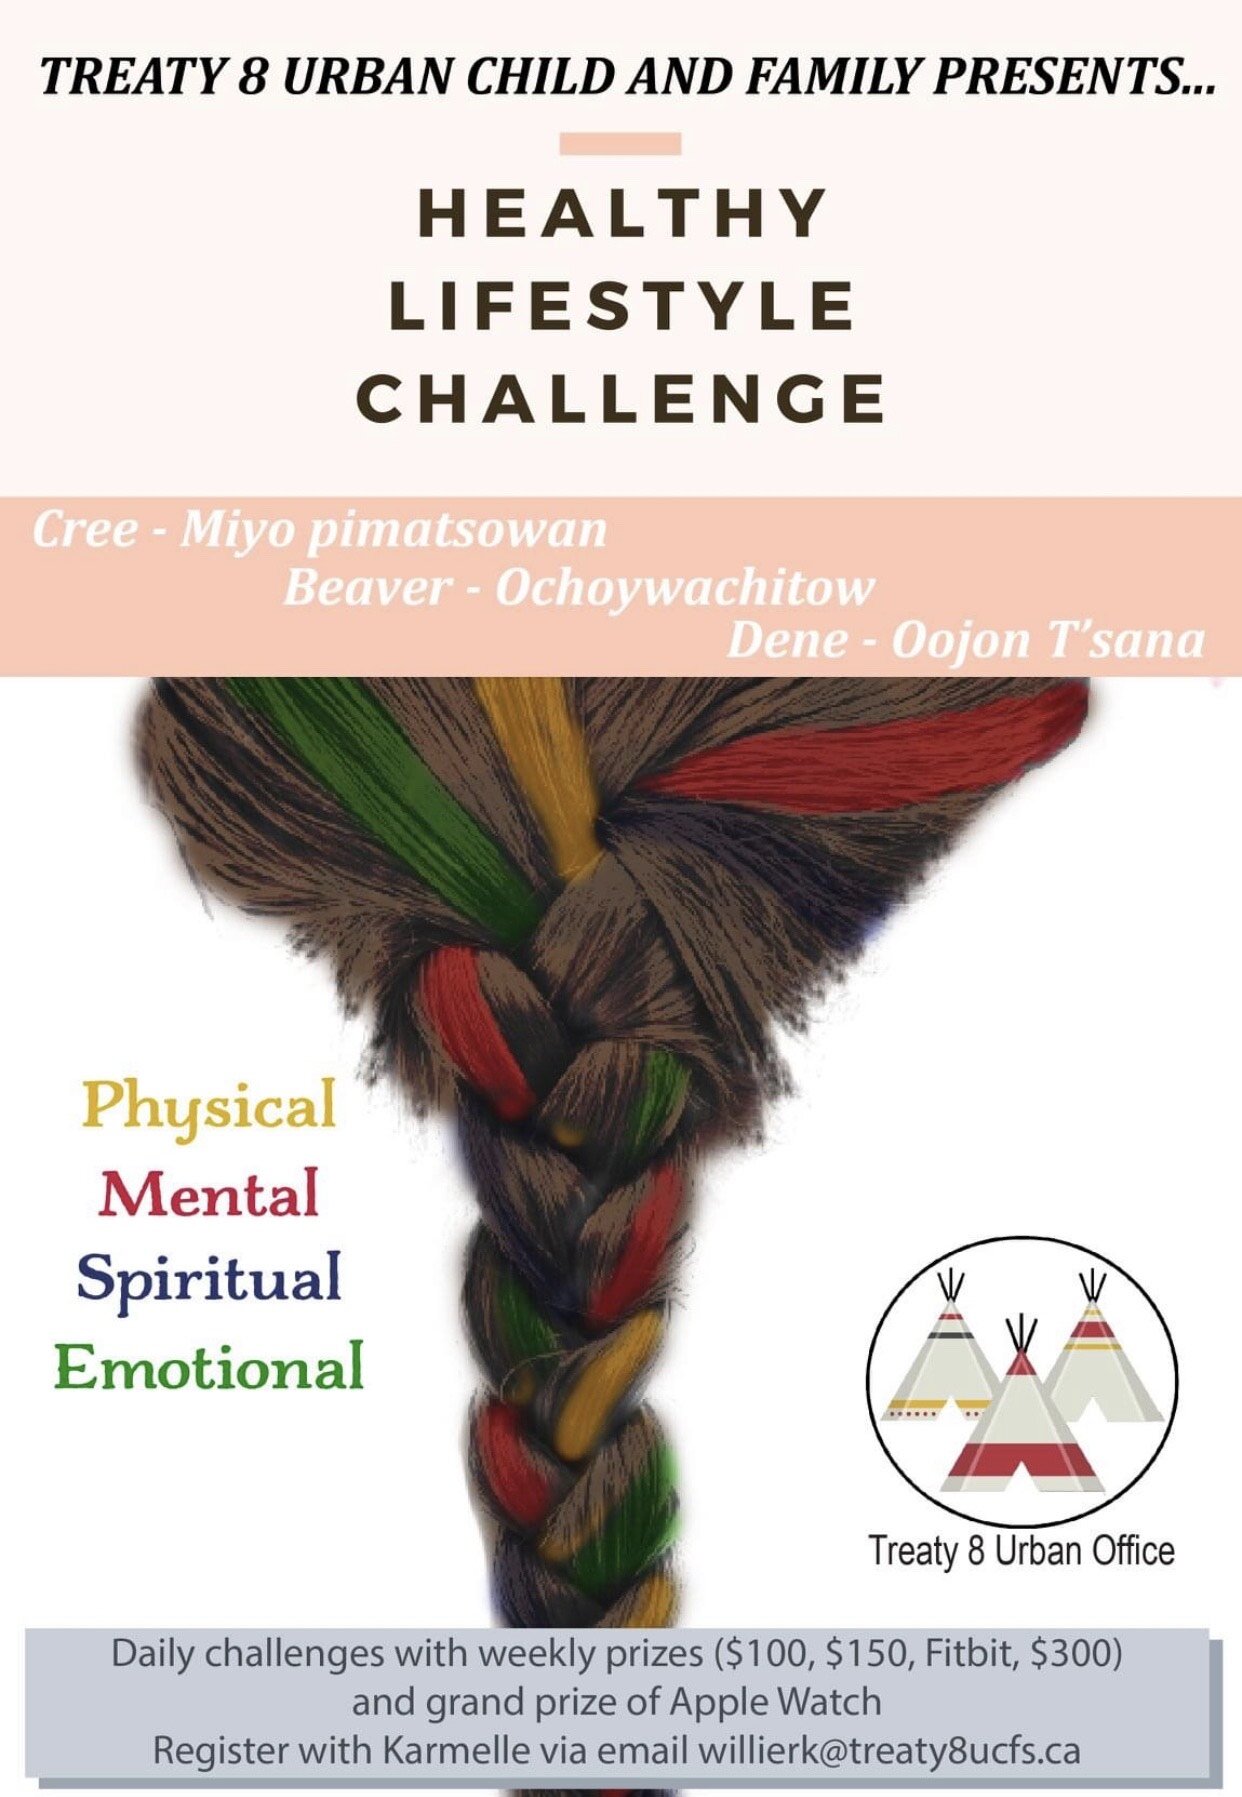 Treaty 8 healthy lifestyle challeng poster.jpg